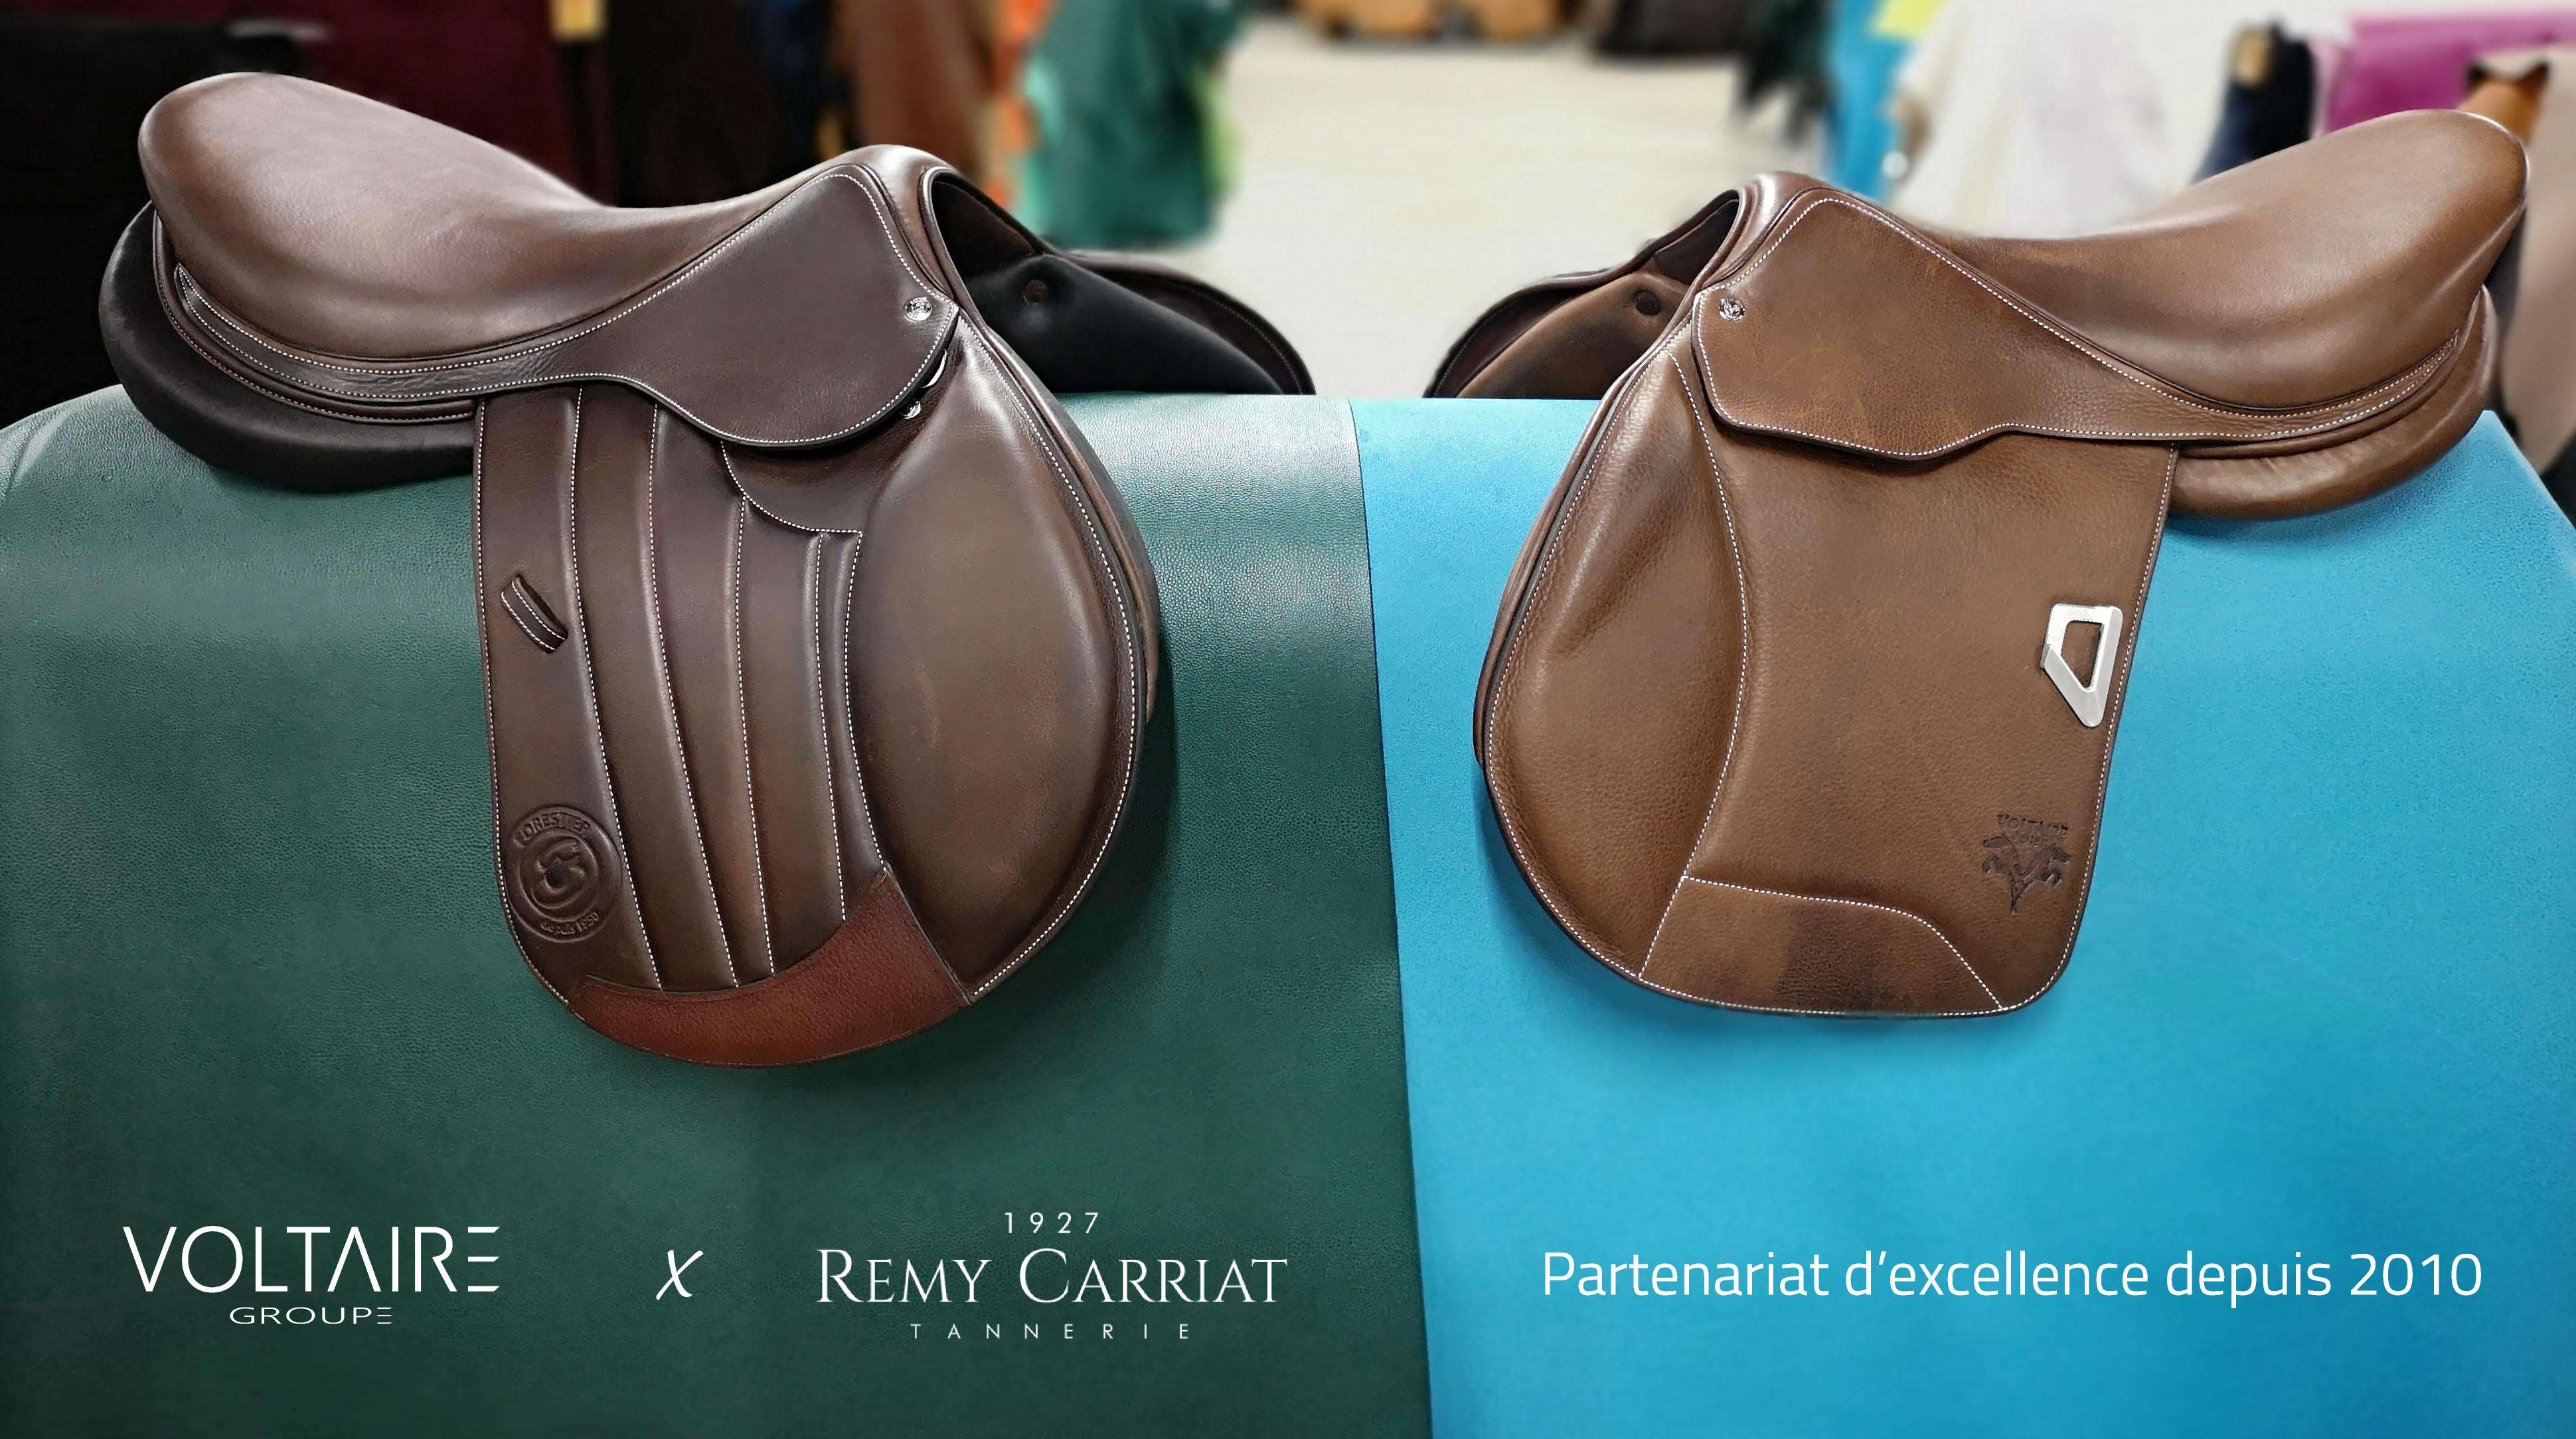 Remy Carriat, a partner to celebrate Excellence of Basque Country.